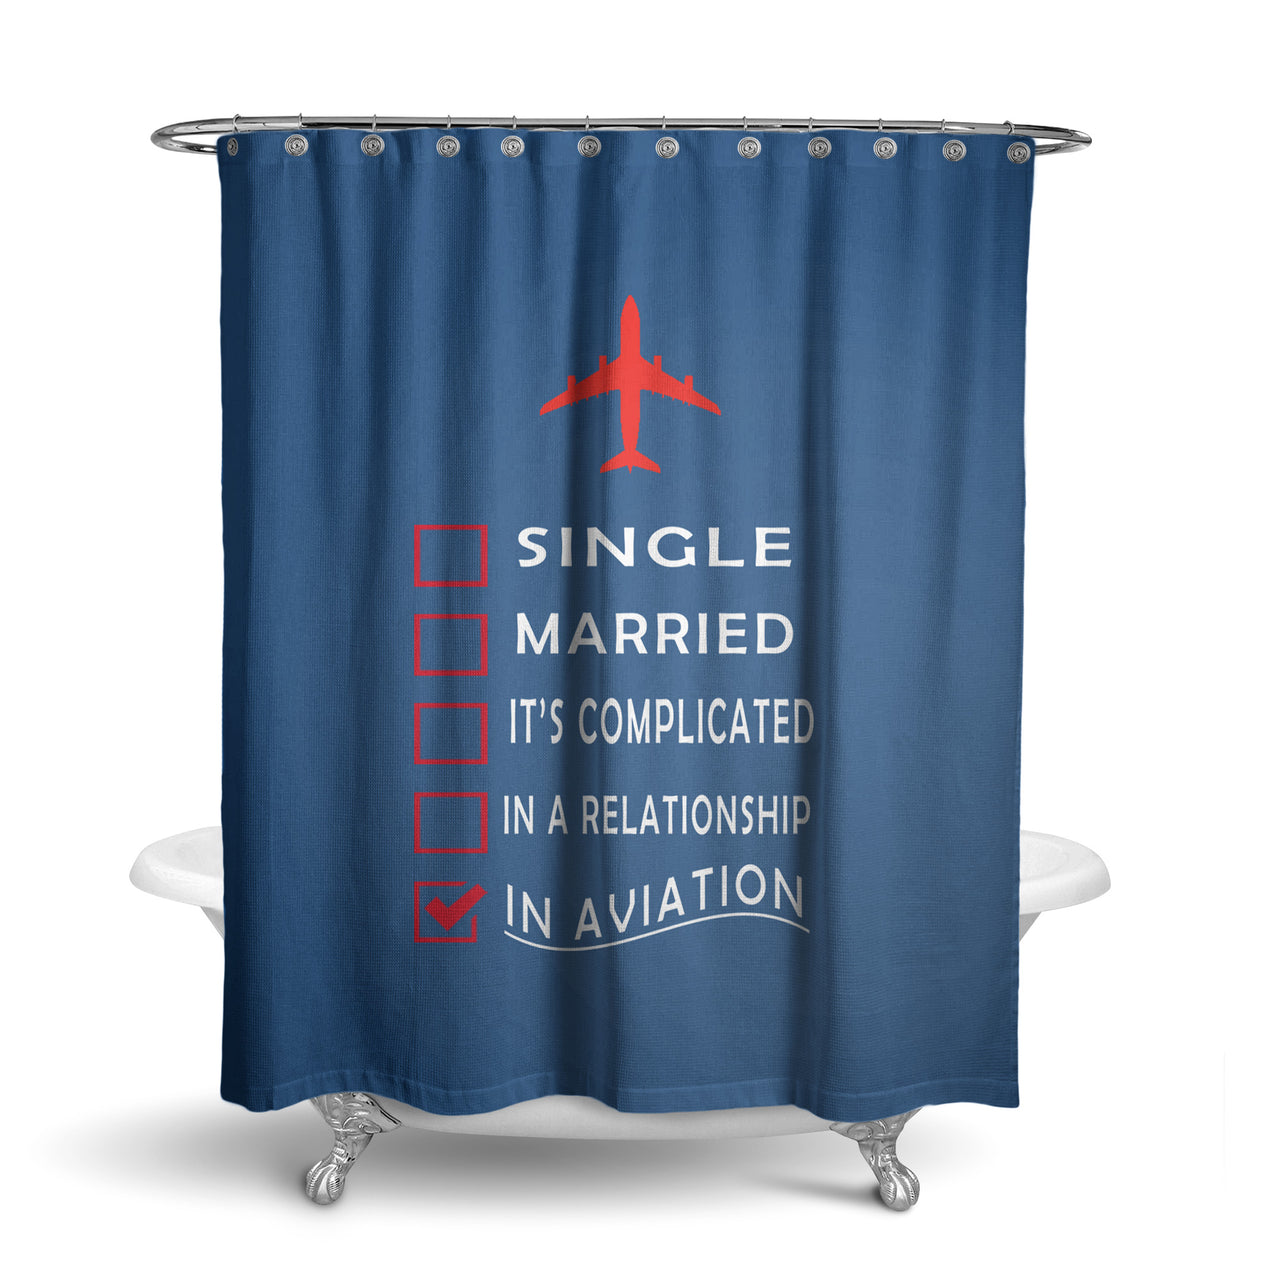 If You're Cool You're Probably a Pilot Designed Shower Curtains